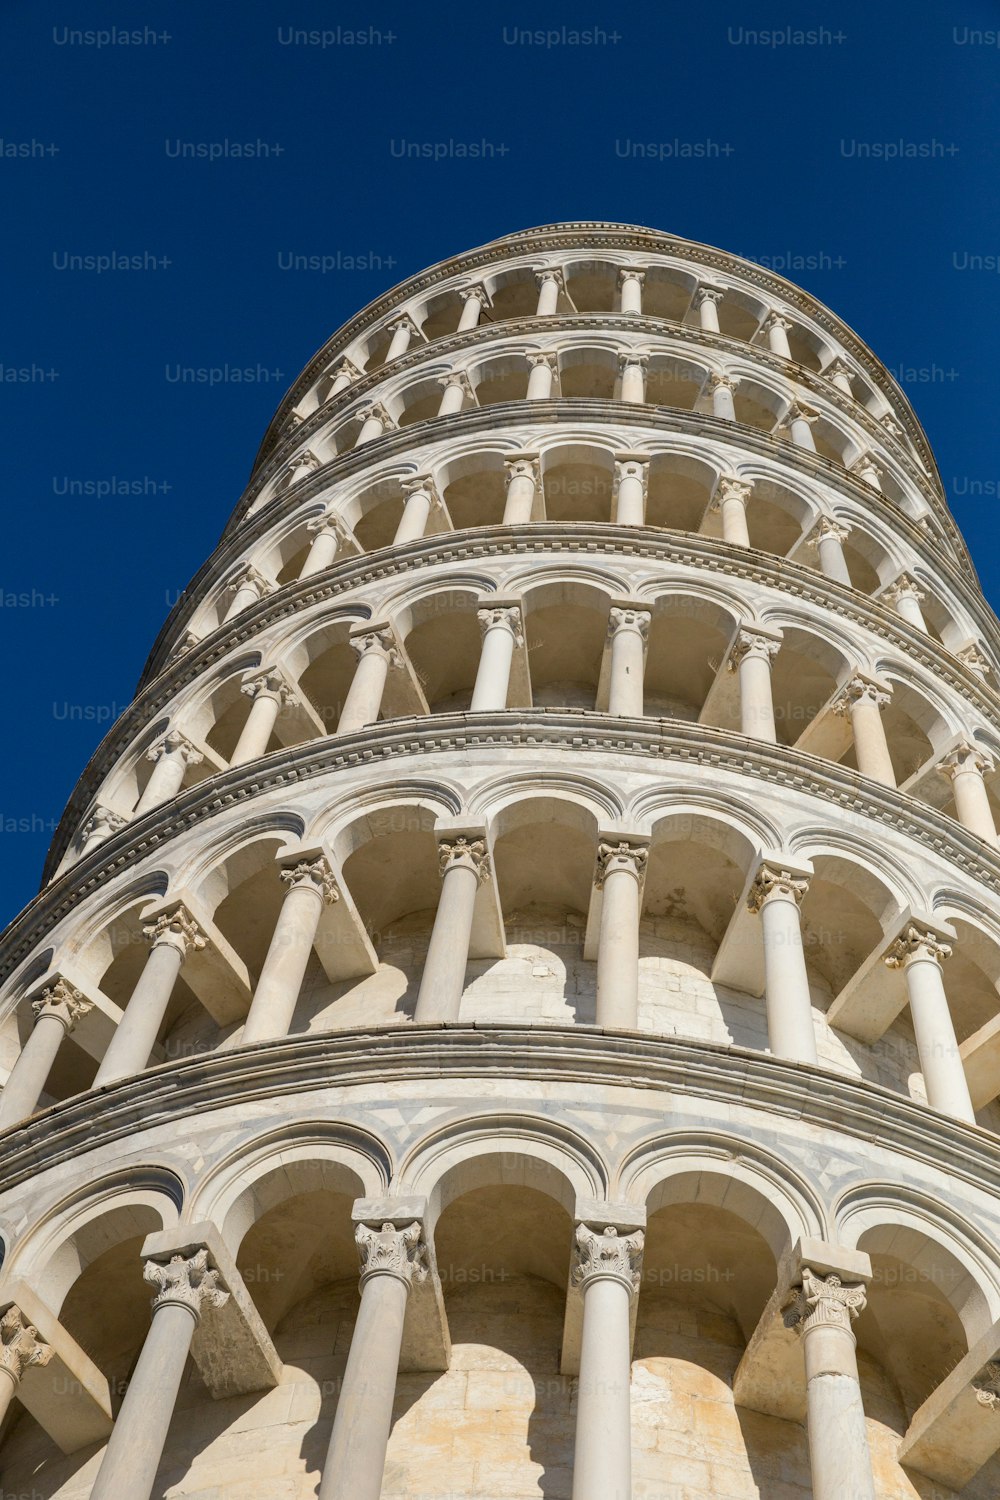 a very tall tower with many arches and pillars